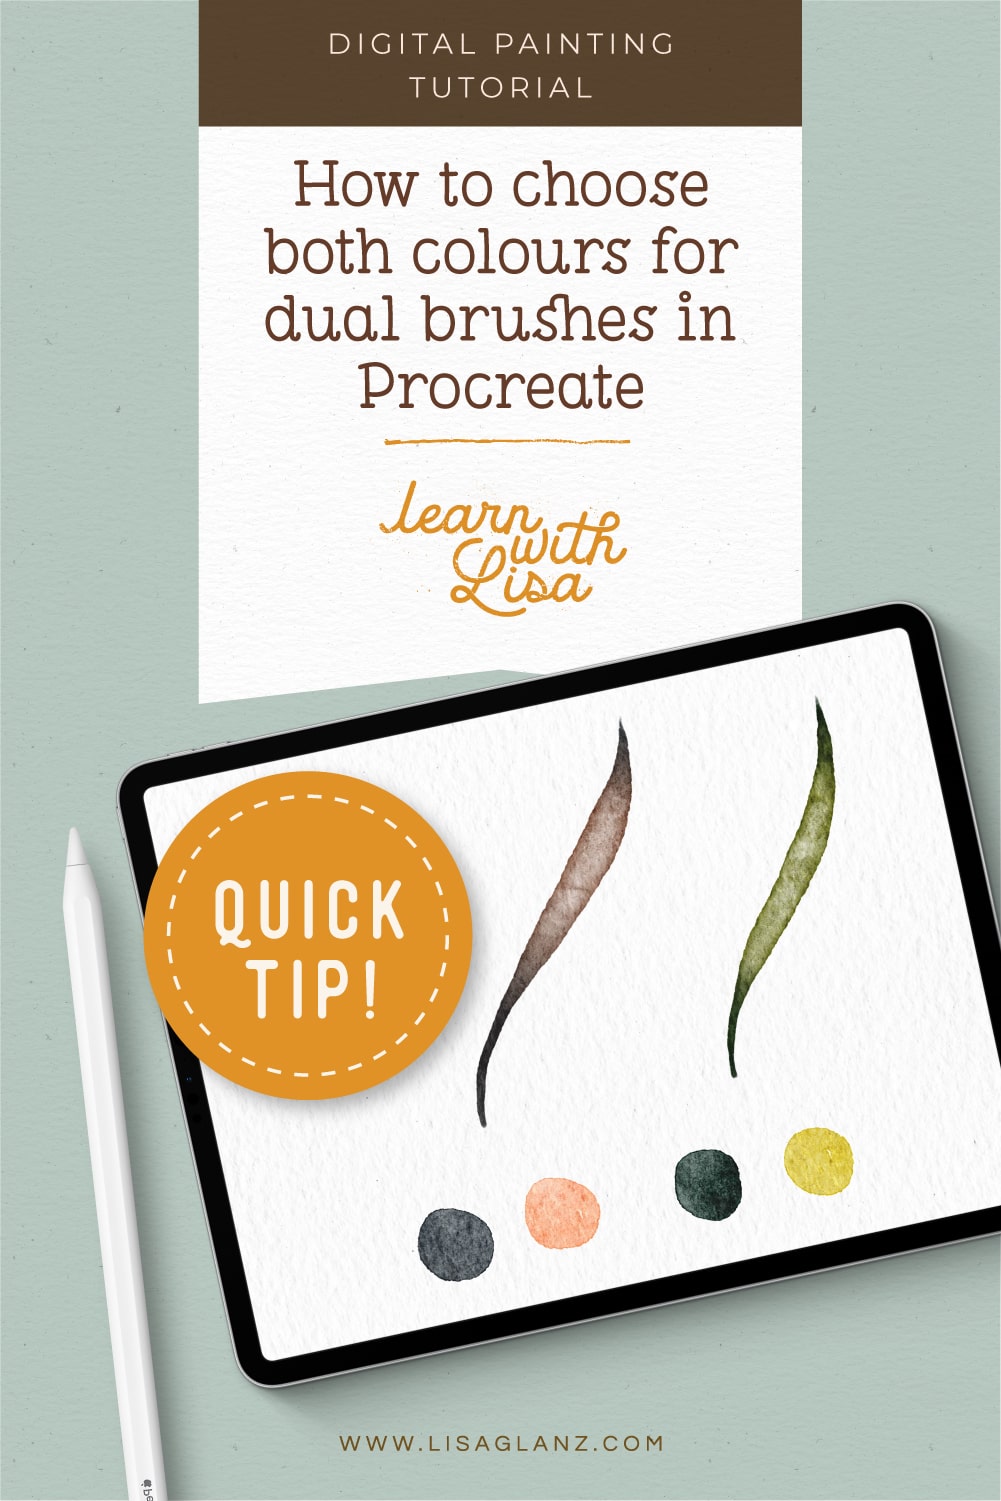 How to choose both colours for dual brushes in Procreate